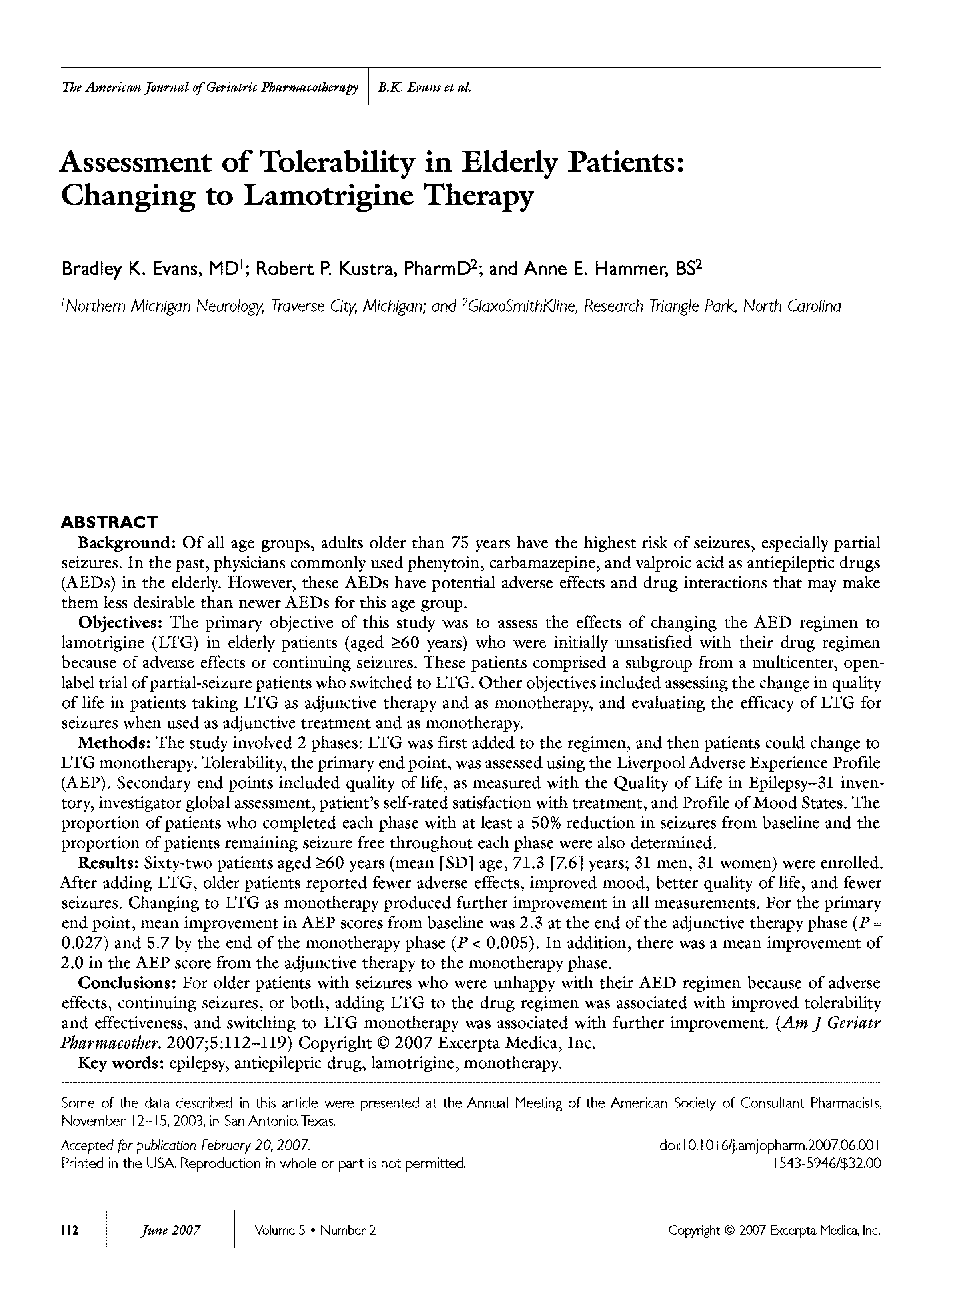 Assessment of tolerability in elderly patients: Changing to lamotrigine therapy